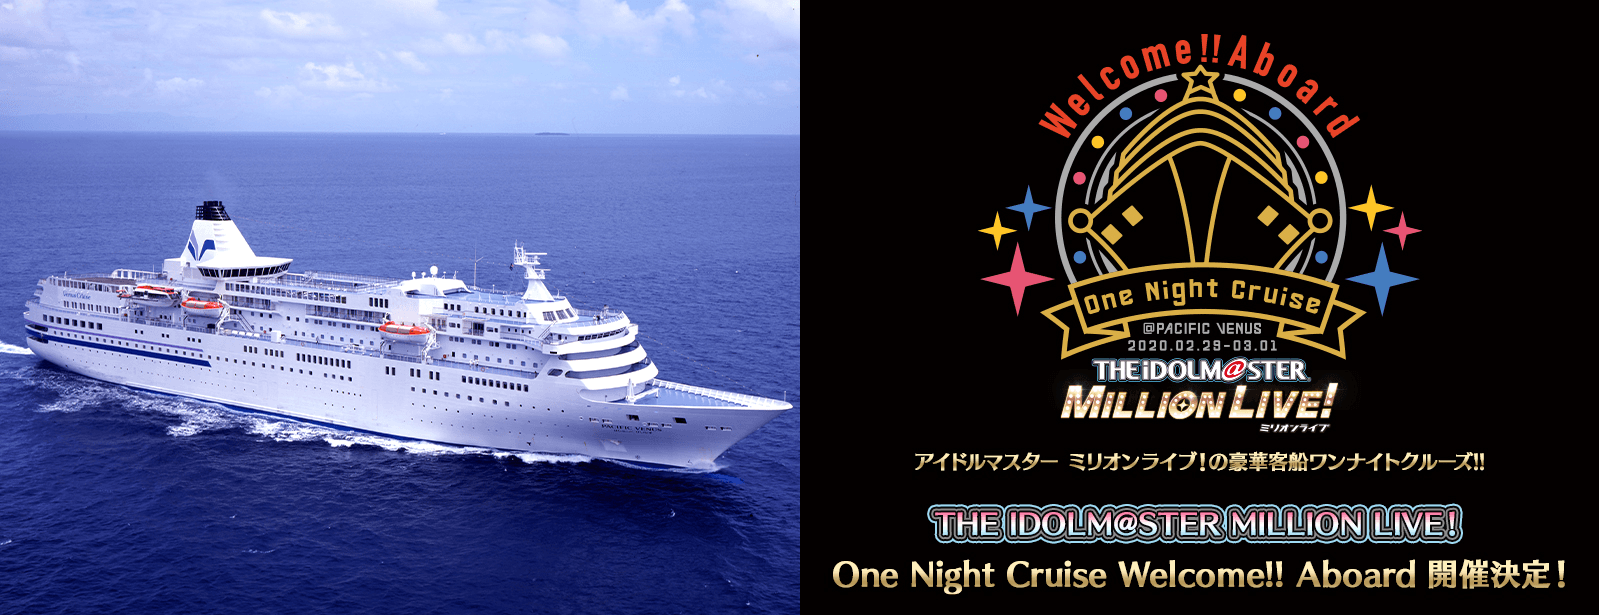 THE IDOLM@STER MILLION LIVE！ One Night Cruise Welcome!! Aboard 開催決定！